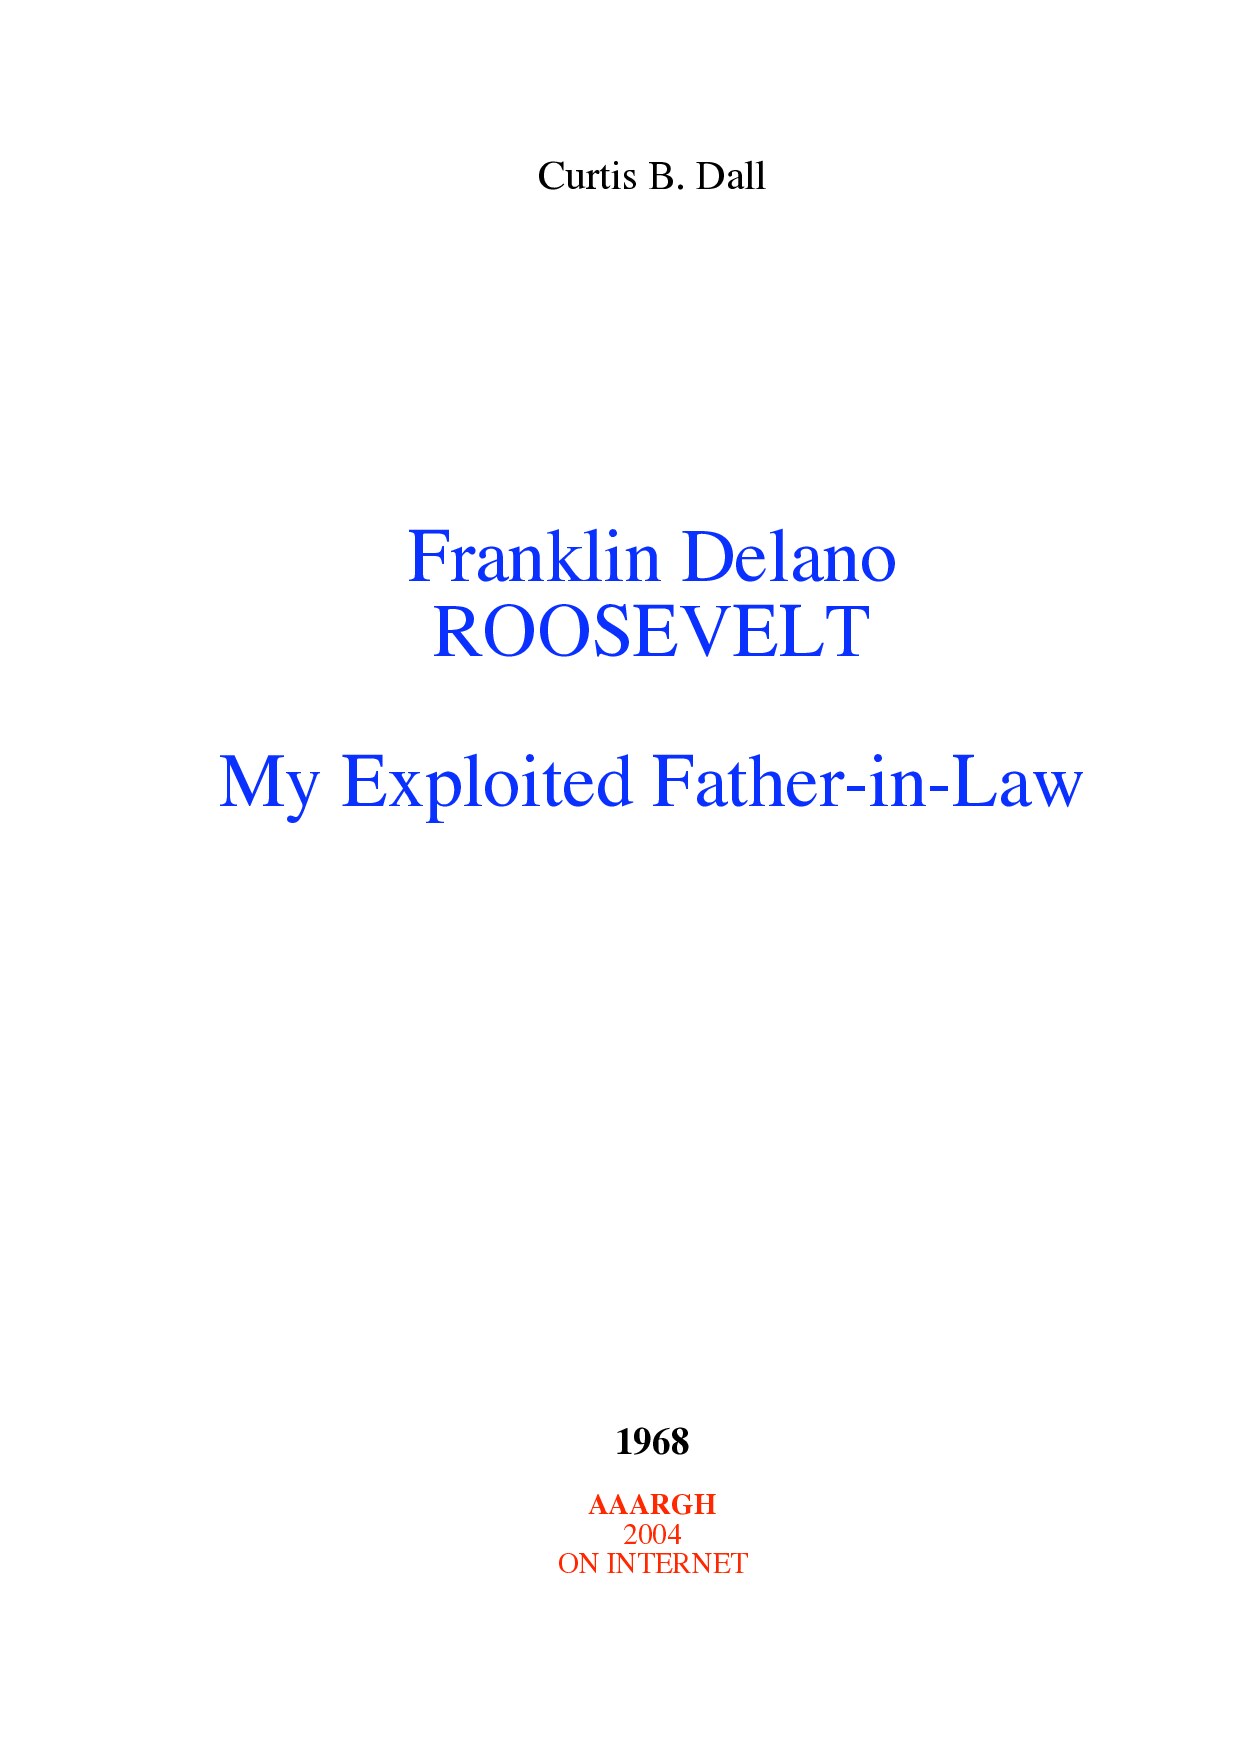 Dall, Curtis B.; Franklin Delano Roosevelt - My Exploited Father-in-law